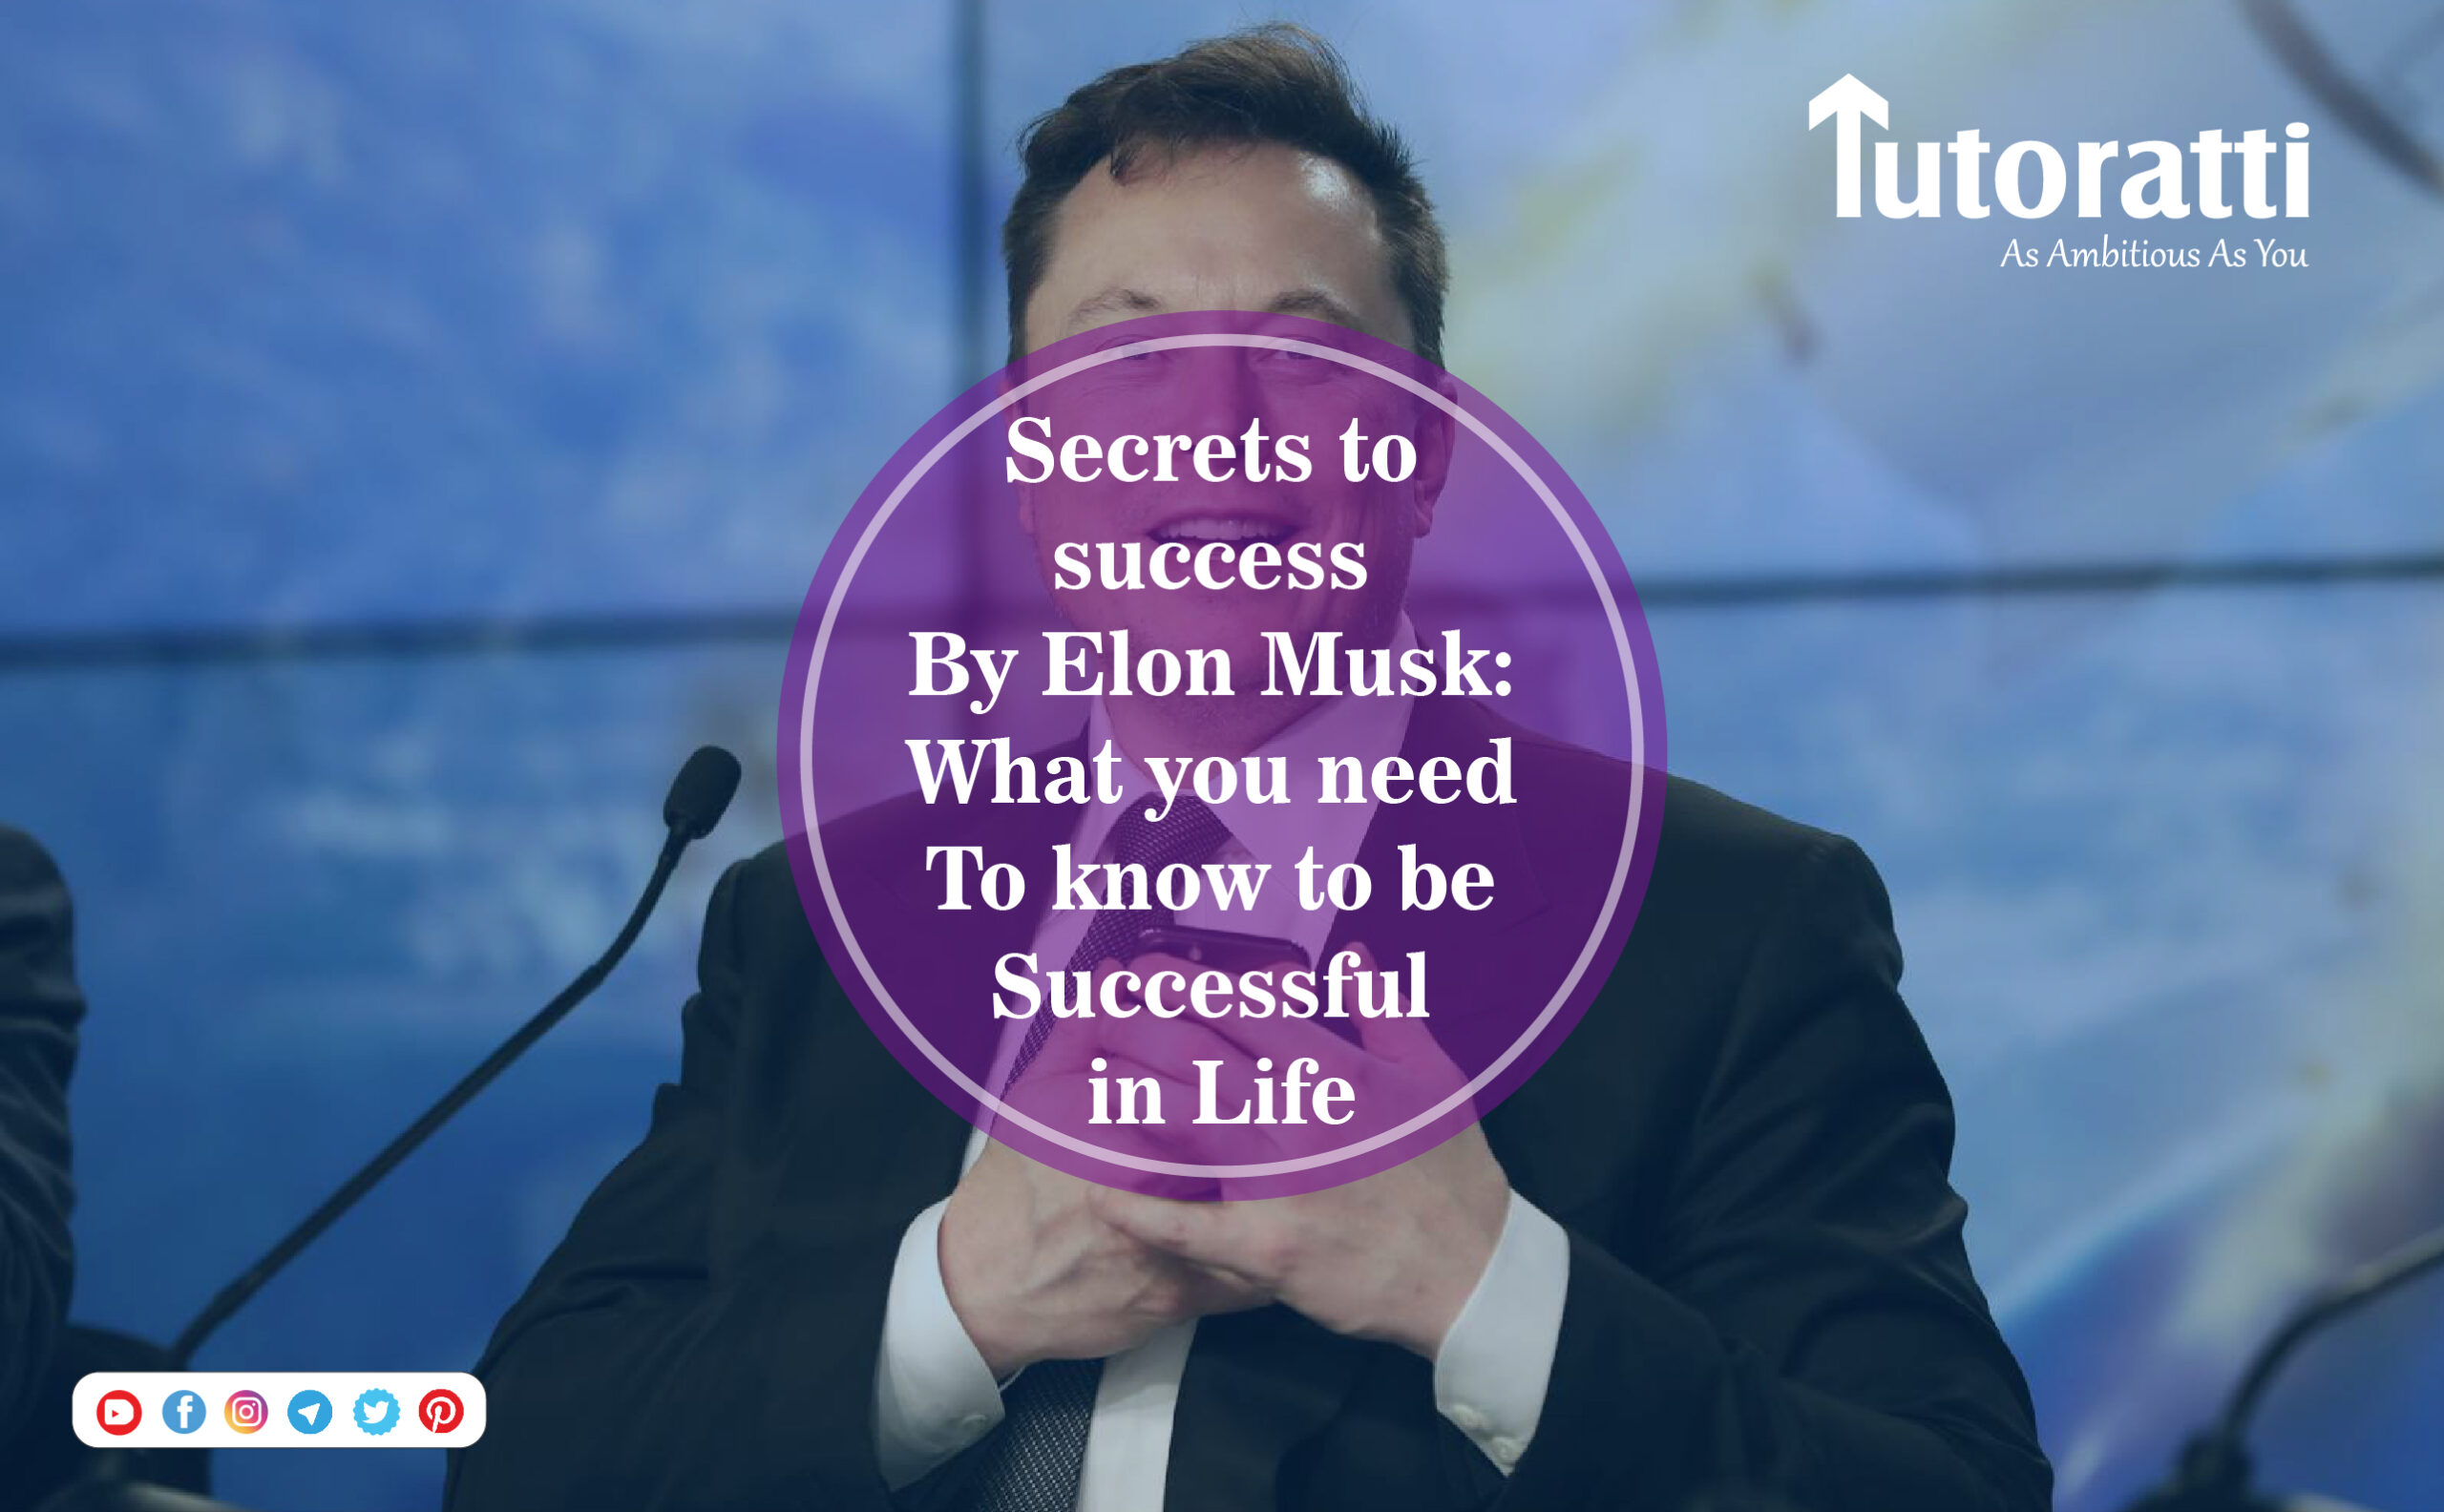 Secrets To Success By Elon Musk: What You Need To Know To Be Successful In Life